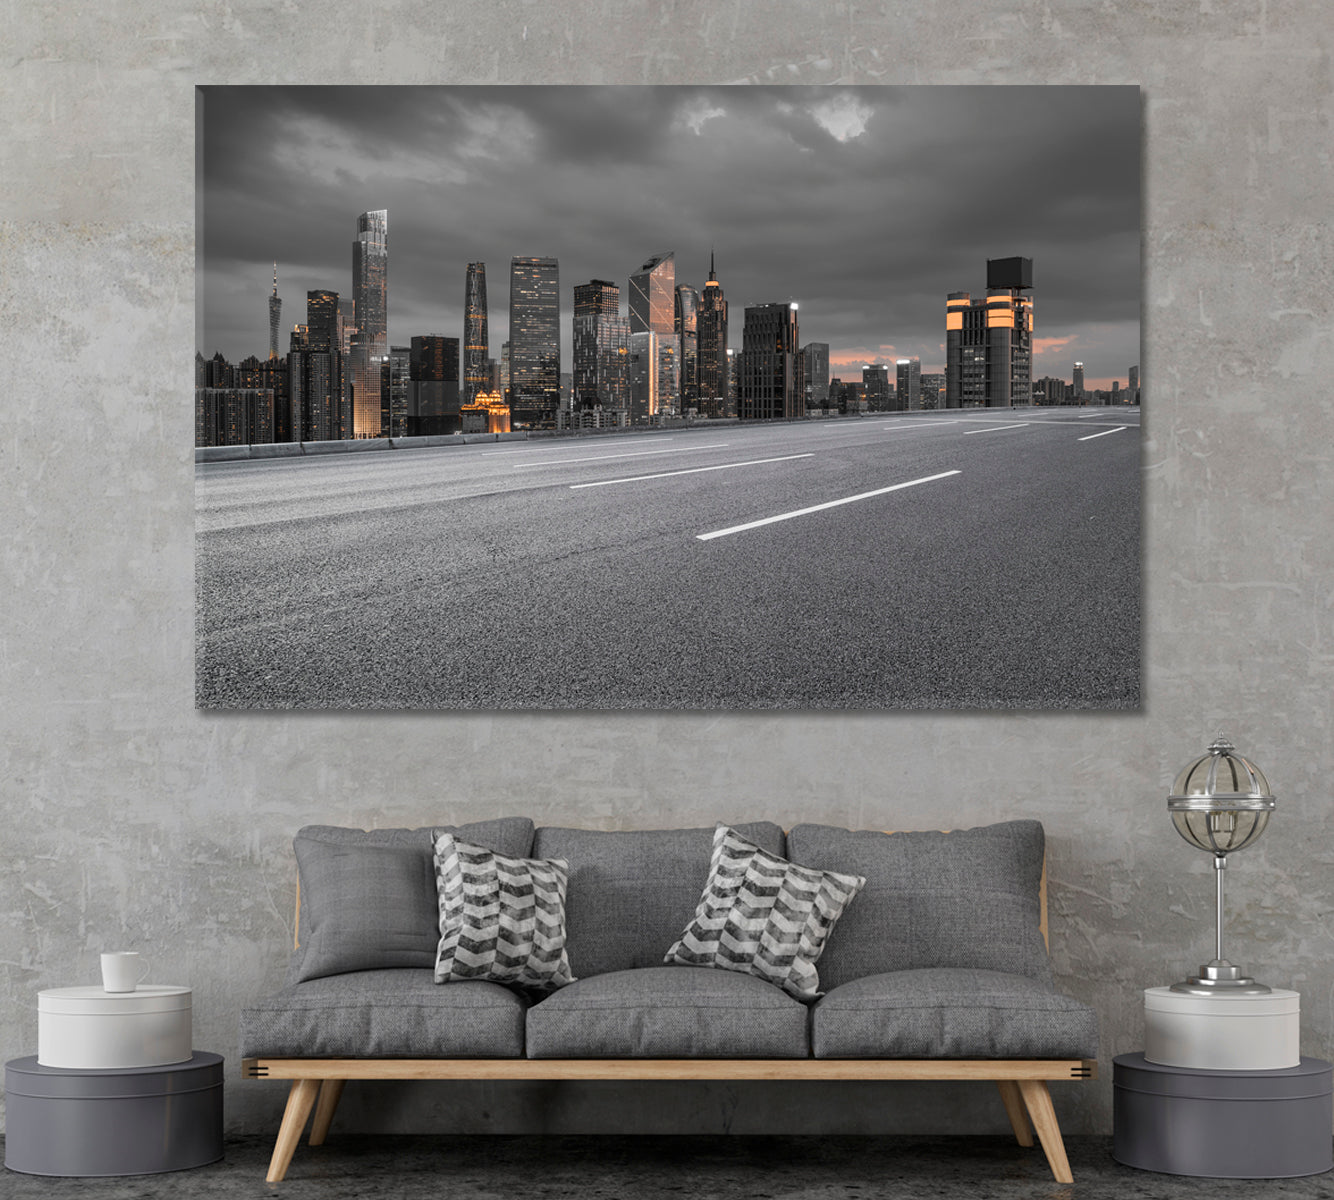 Guangzhou City Road Canvas Print ArtLexy 1 Panel 24"x16" inches 